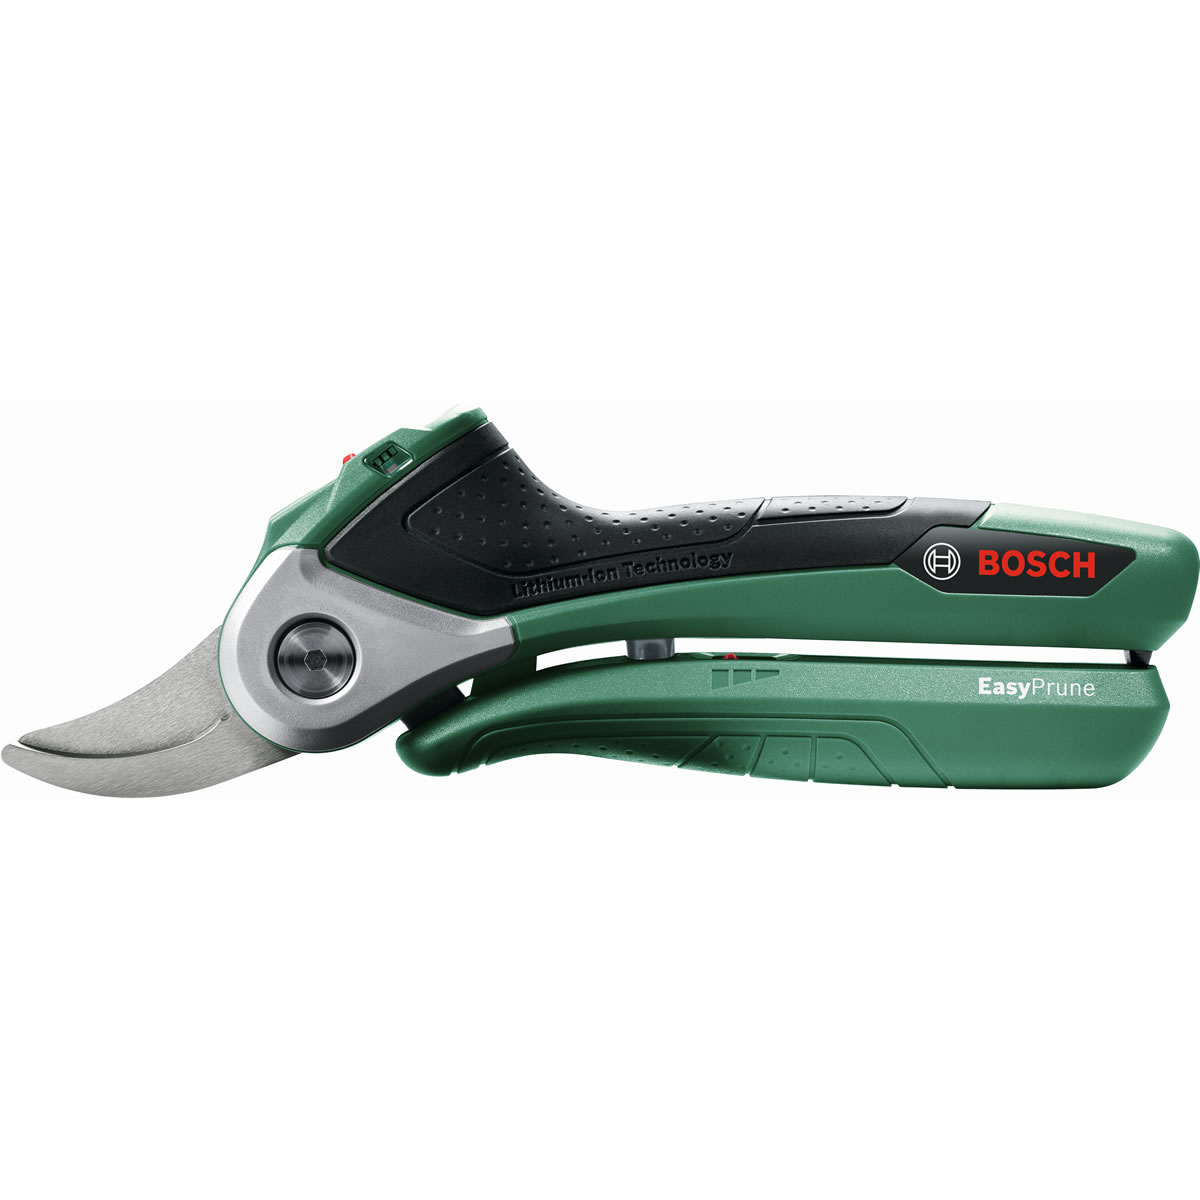 Extra image of Bosch EasyPrune Electric Secateurs